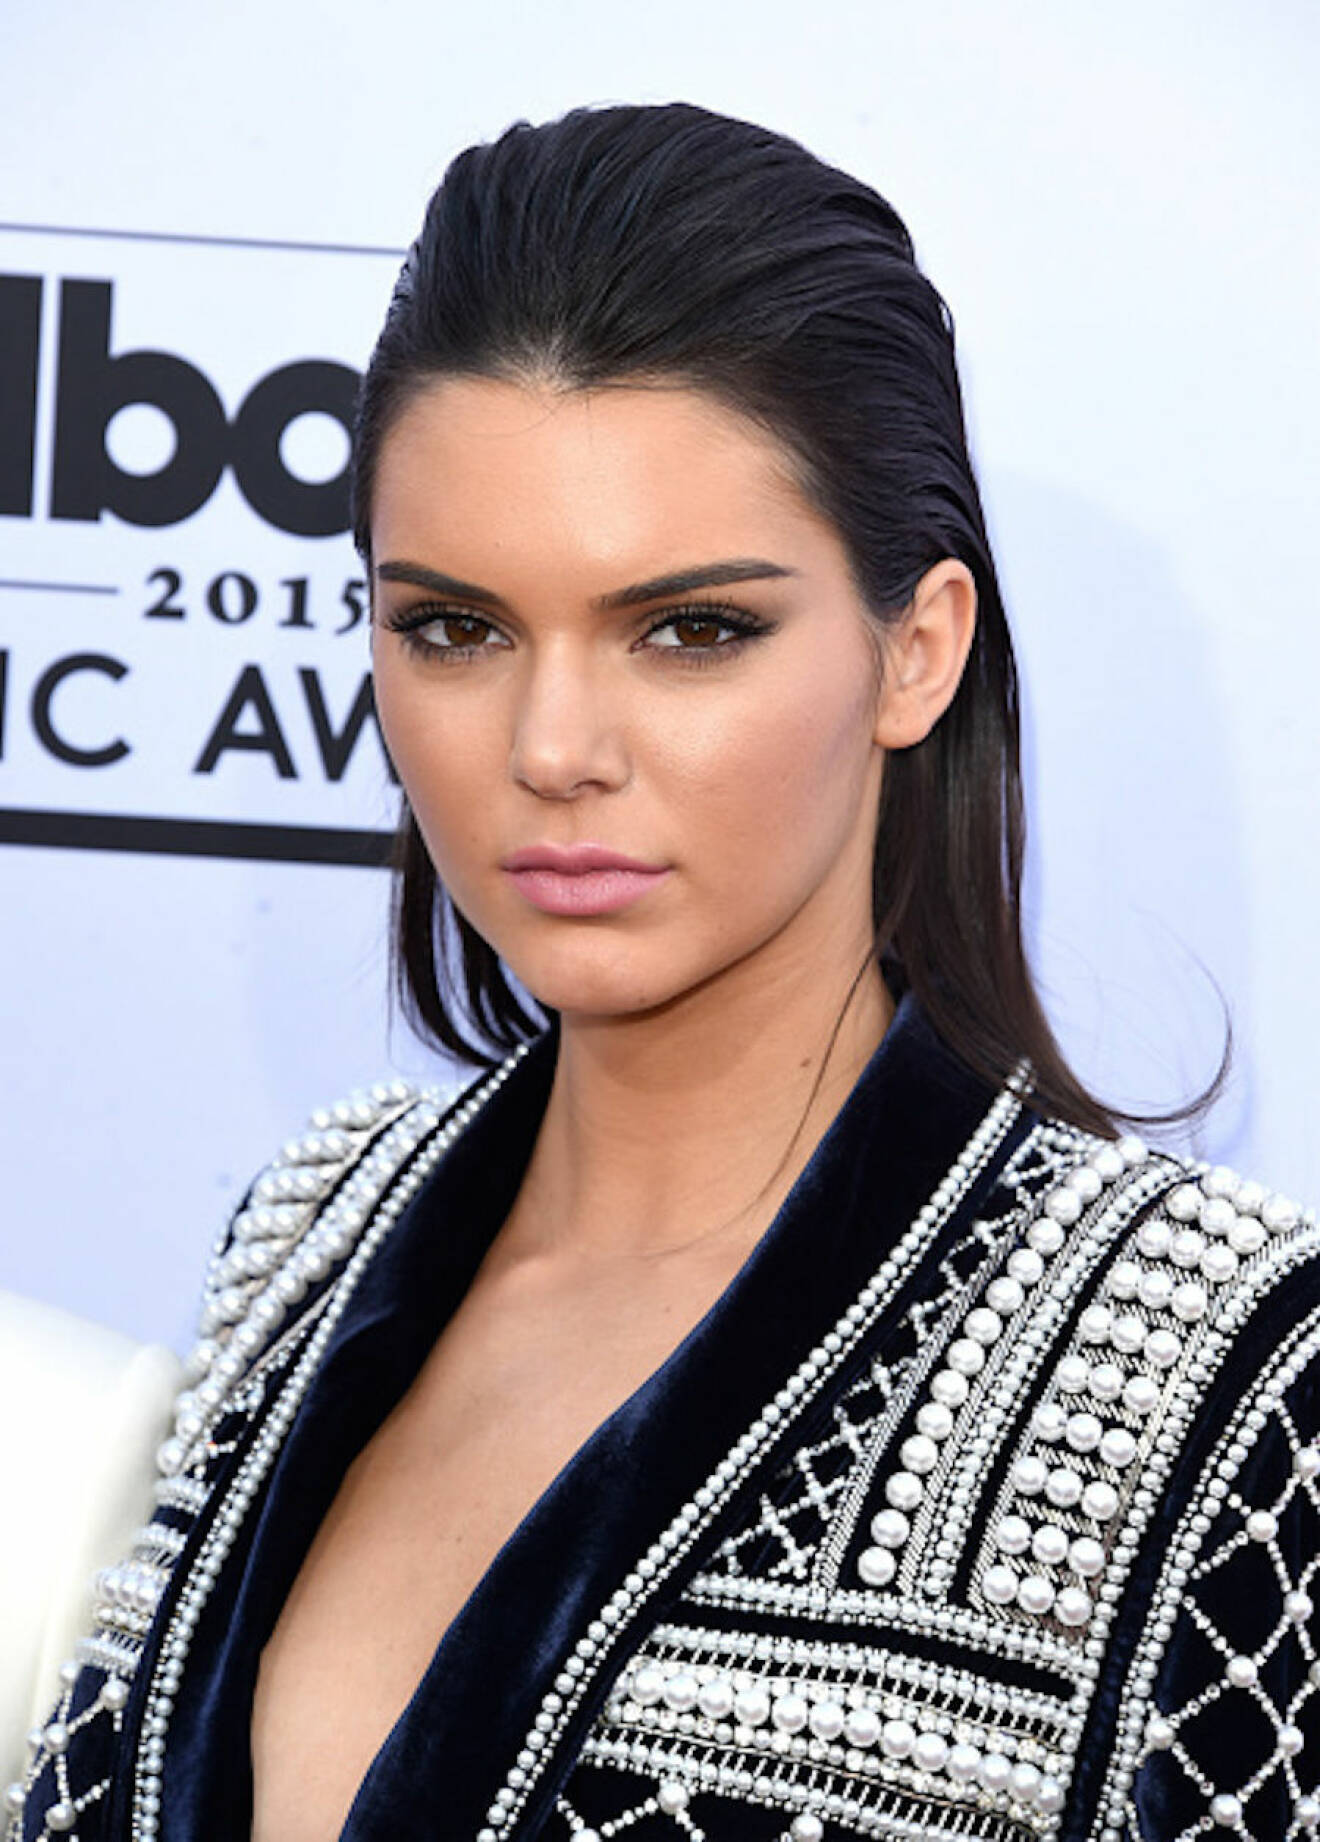 LAS VEGAS, NV - MAY 17: Model Kendall Jenner wearing Balmain x H&M attends the 2015 Billboard Music Awards at MGM Grand Garden Arena on May 17, 2015 in Las Vegas, Nevada. (Photo by Jason Merritt/Getty Images)